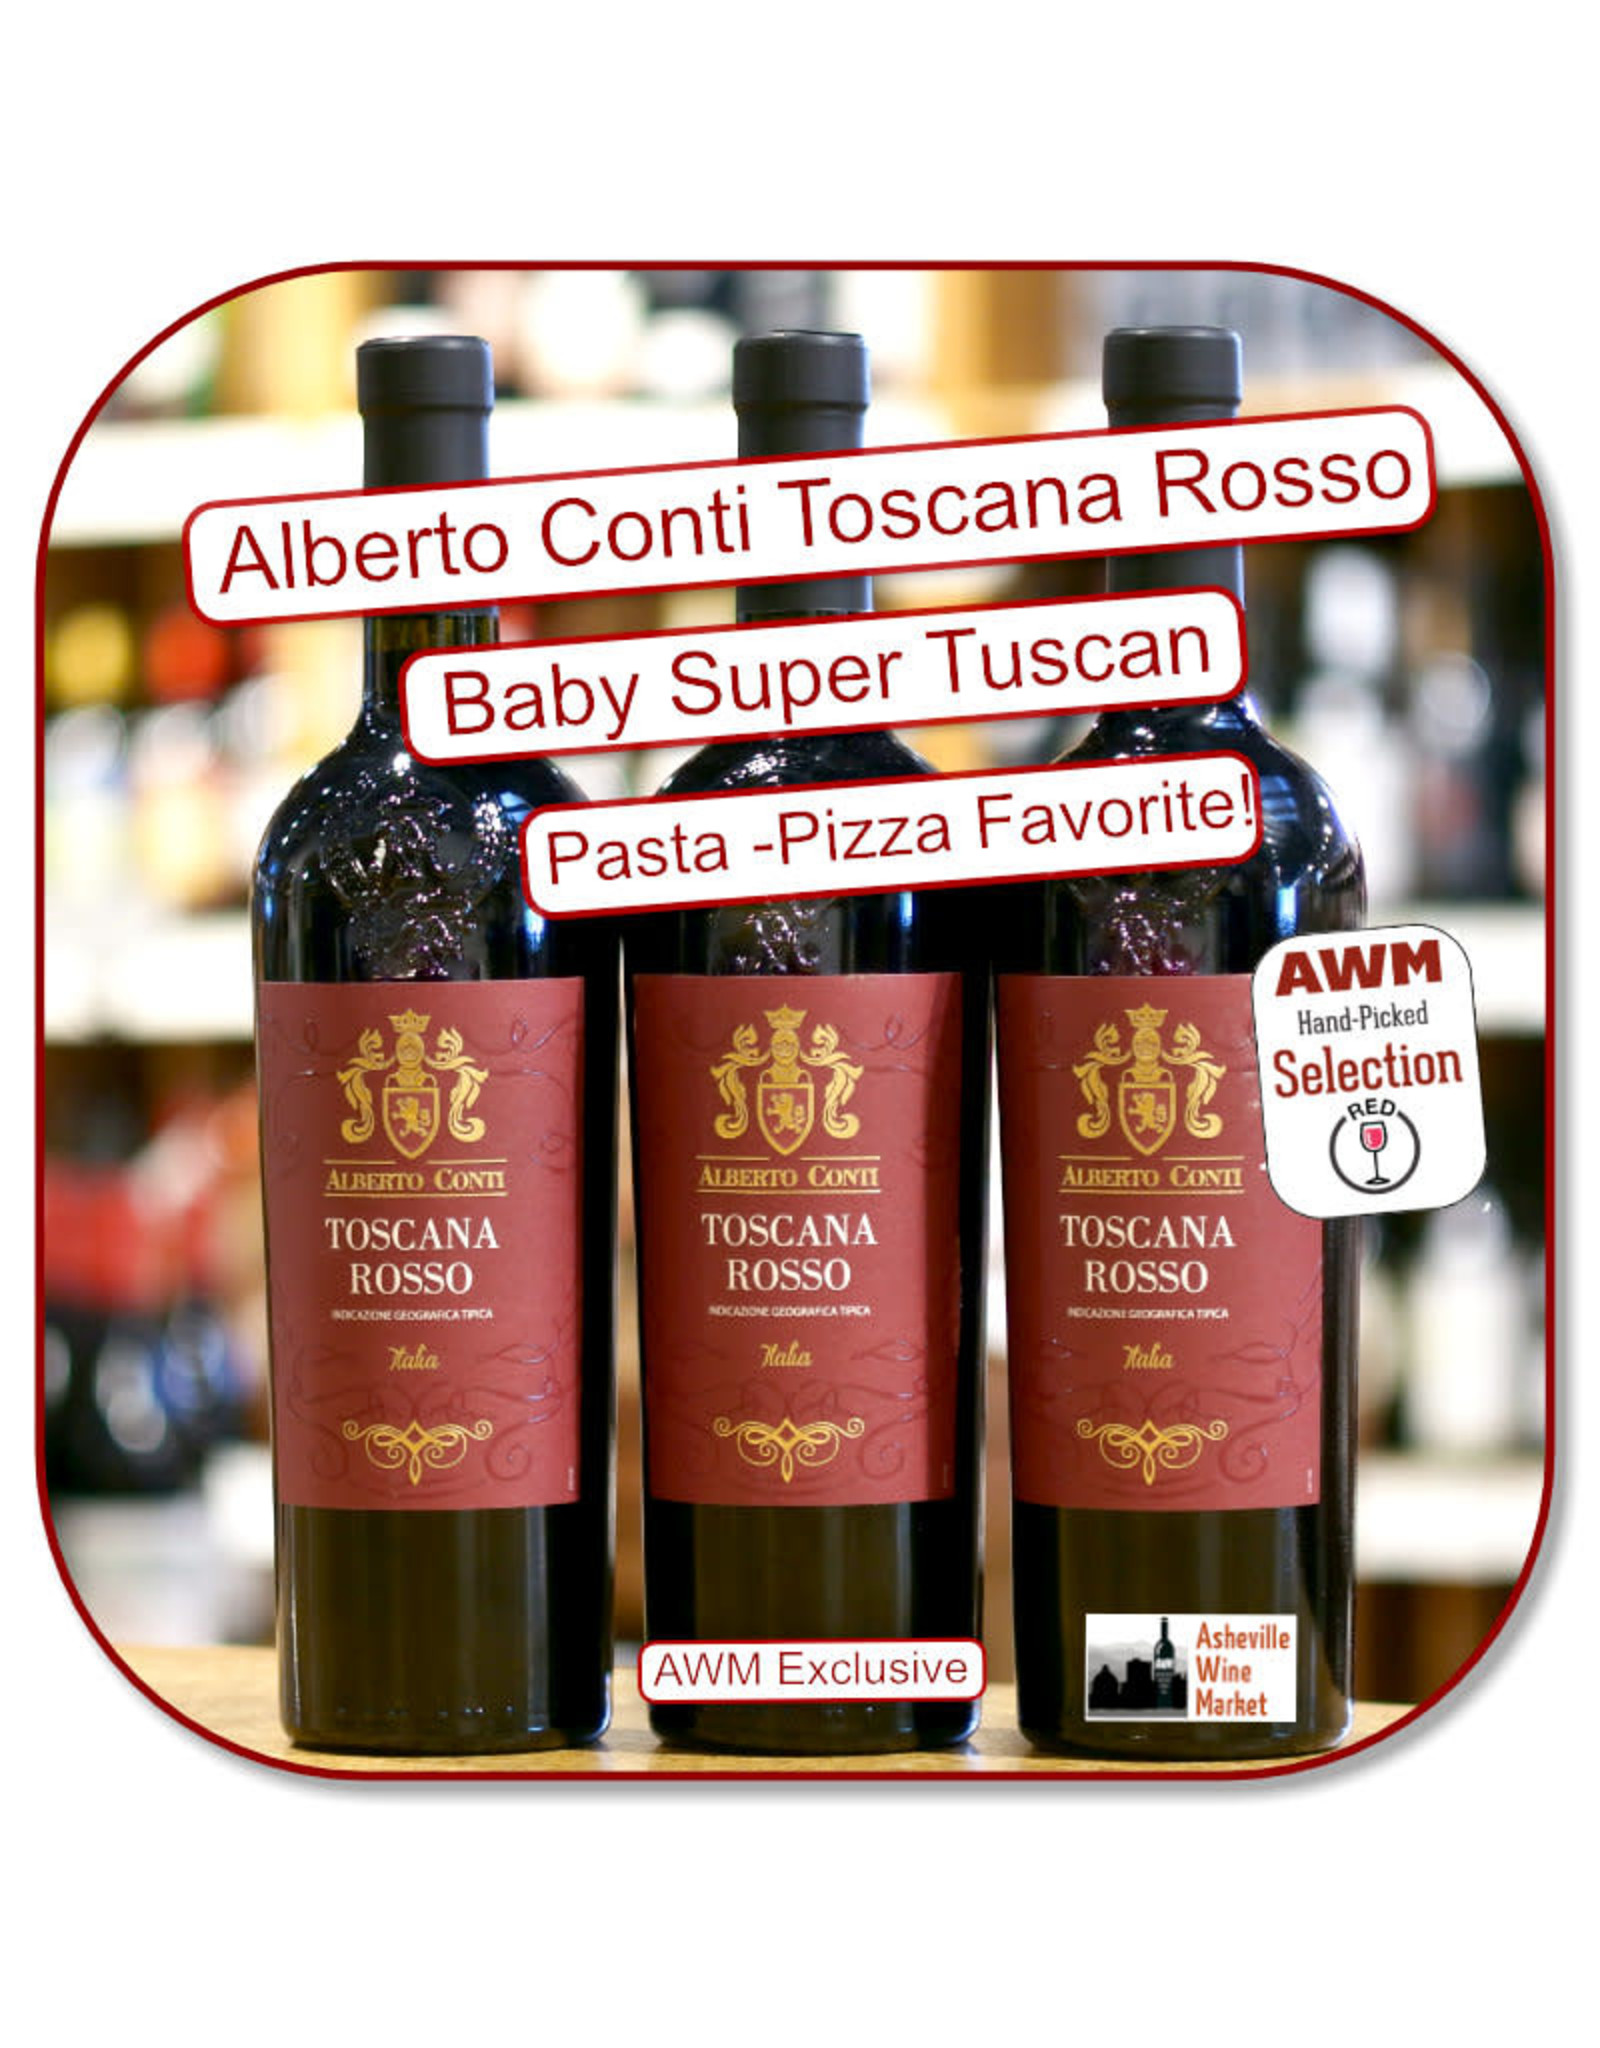 Red Blend - Europe Alberto Conti Toscana Rosso 2019